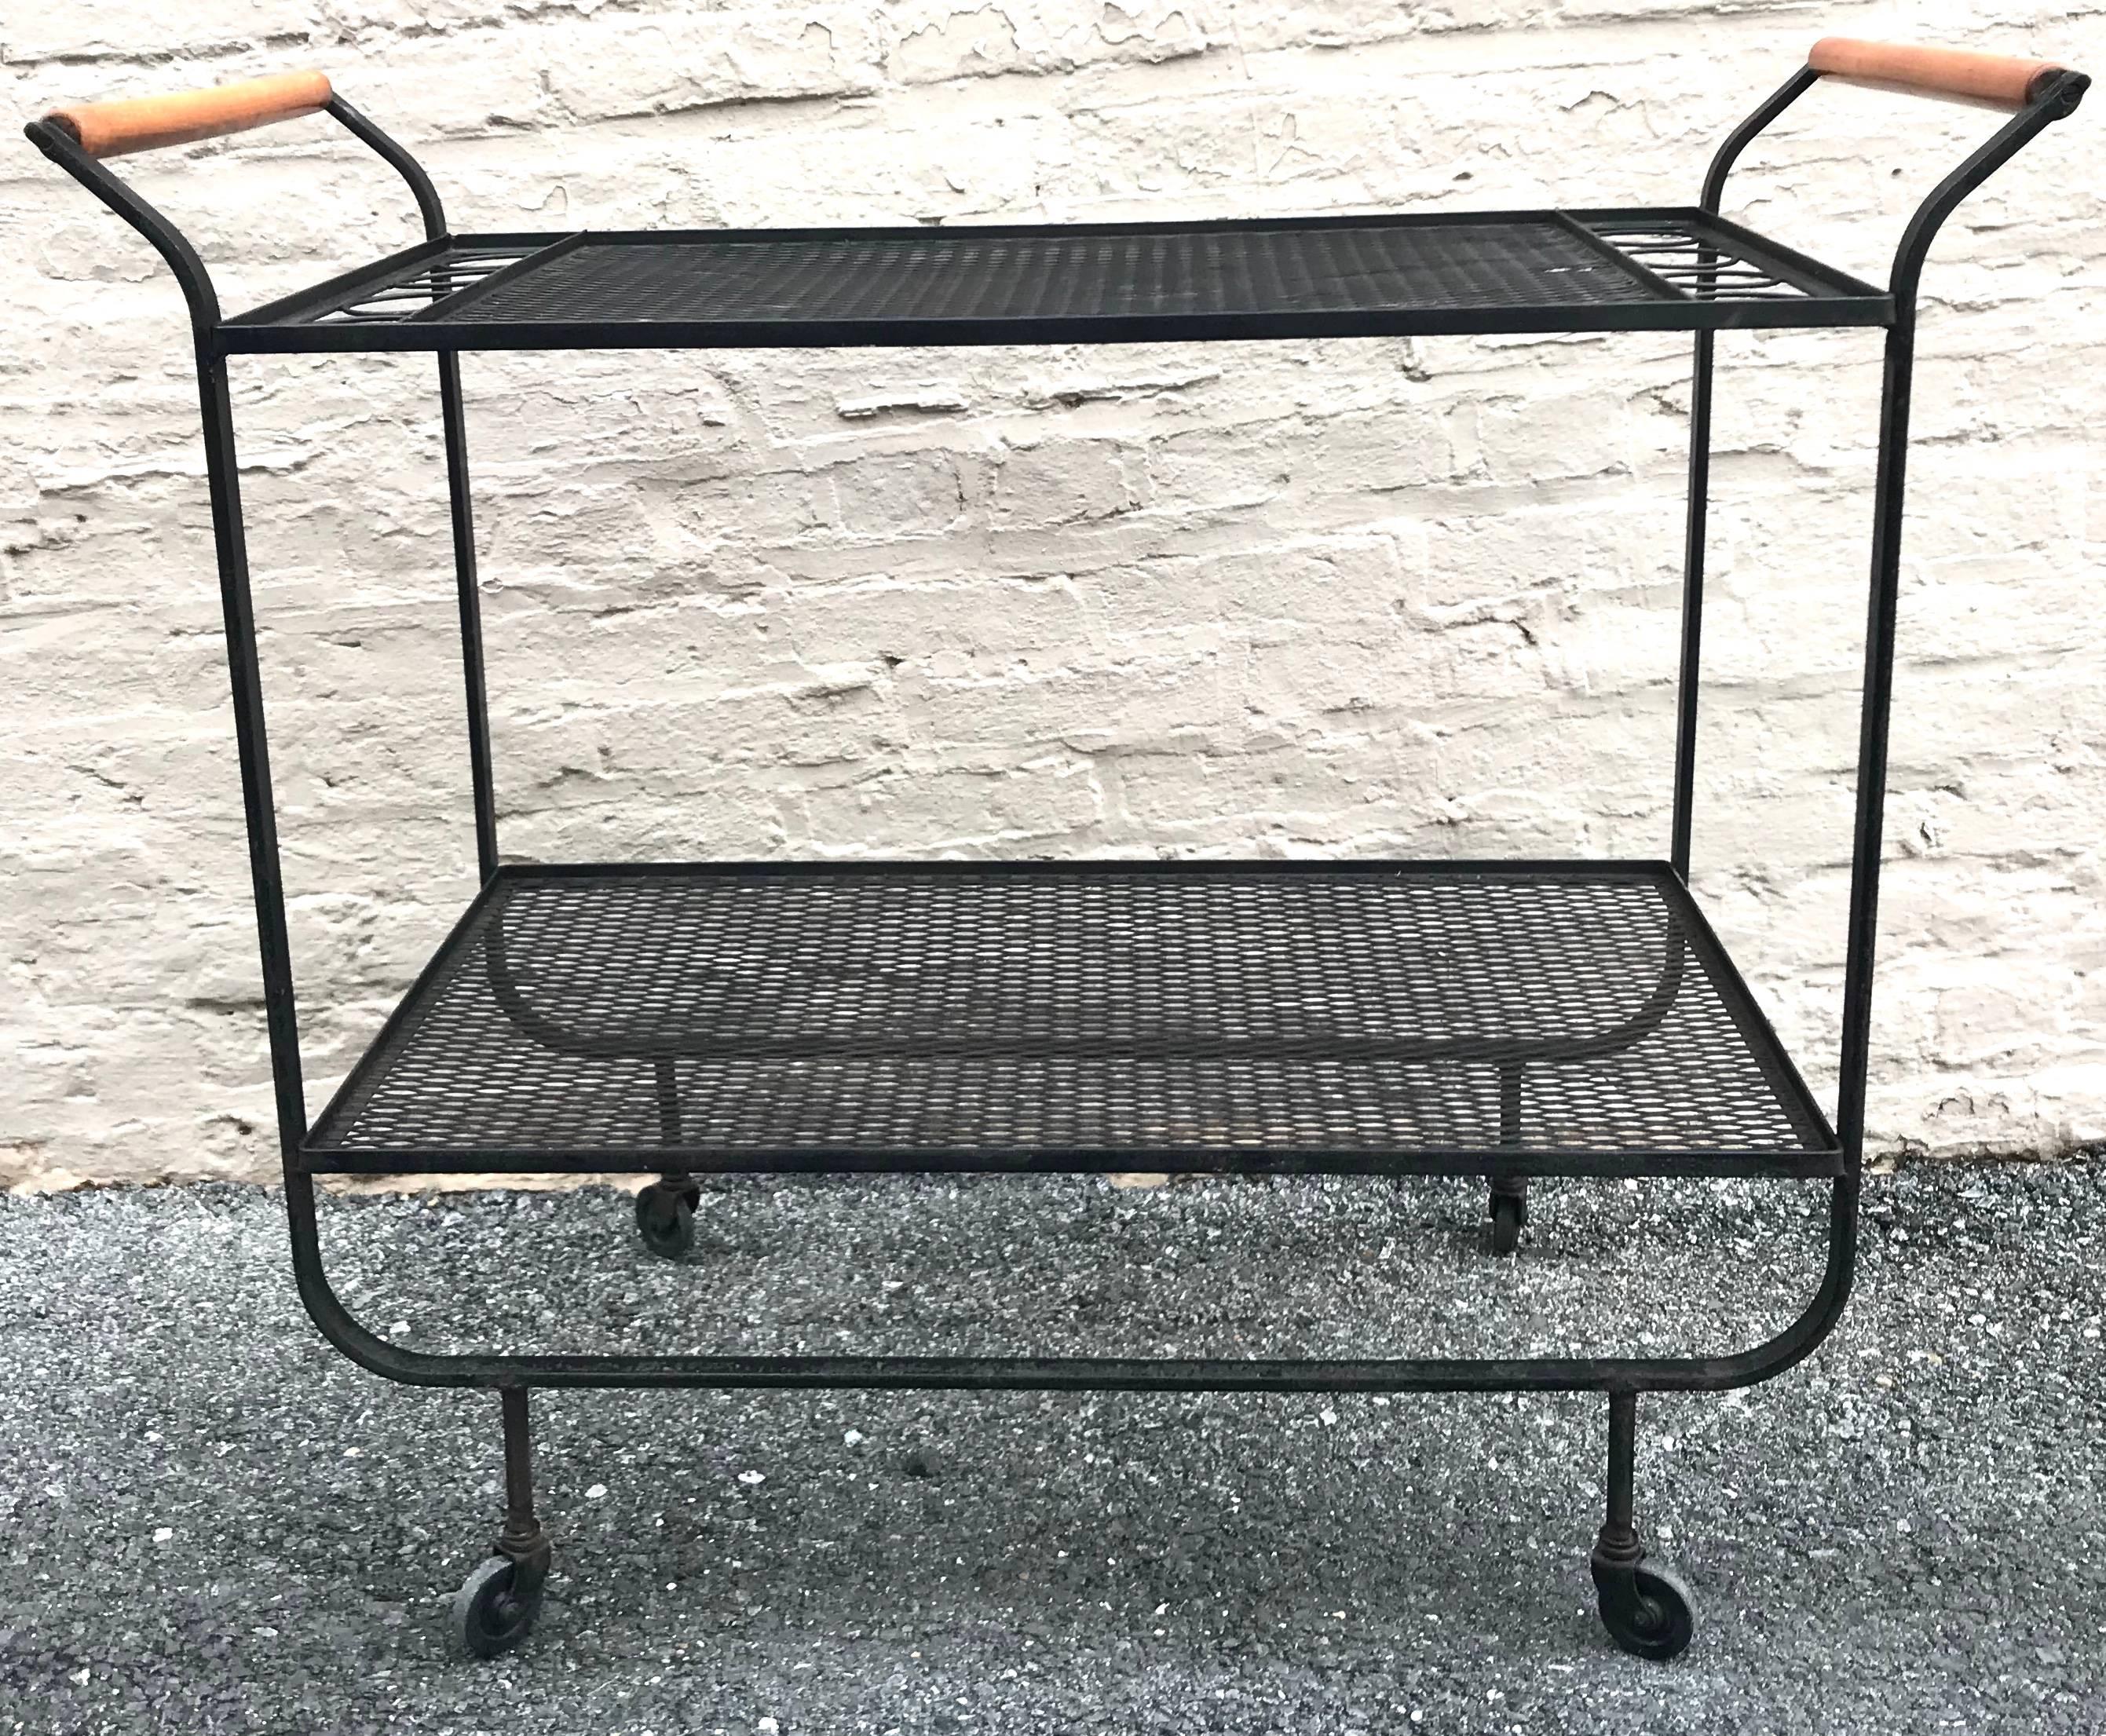 Rare, 1950s Modernist Frederick Weinberg Wrought Iron Bar Cart In Excellent Condition For Sale In Washington, DC